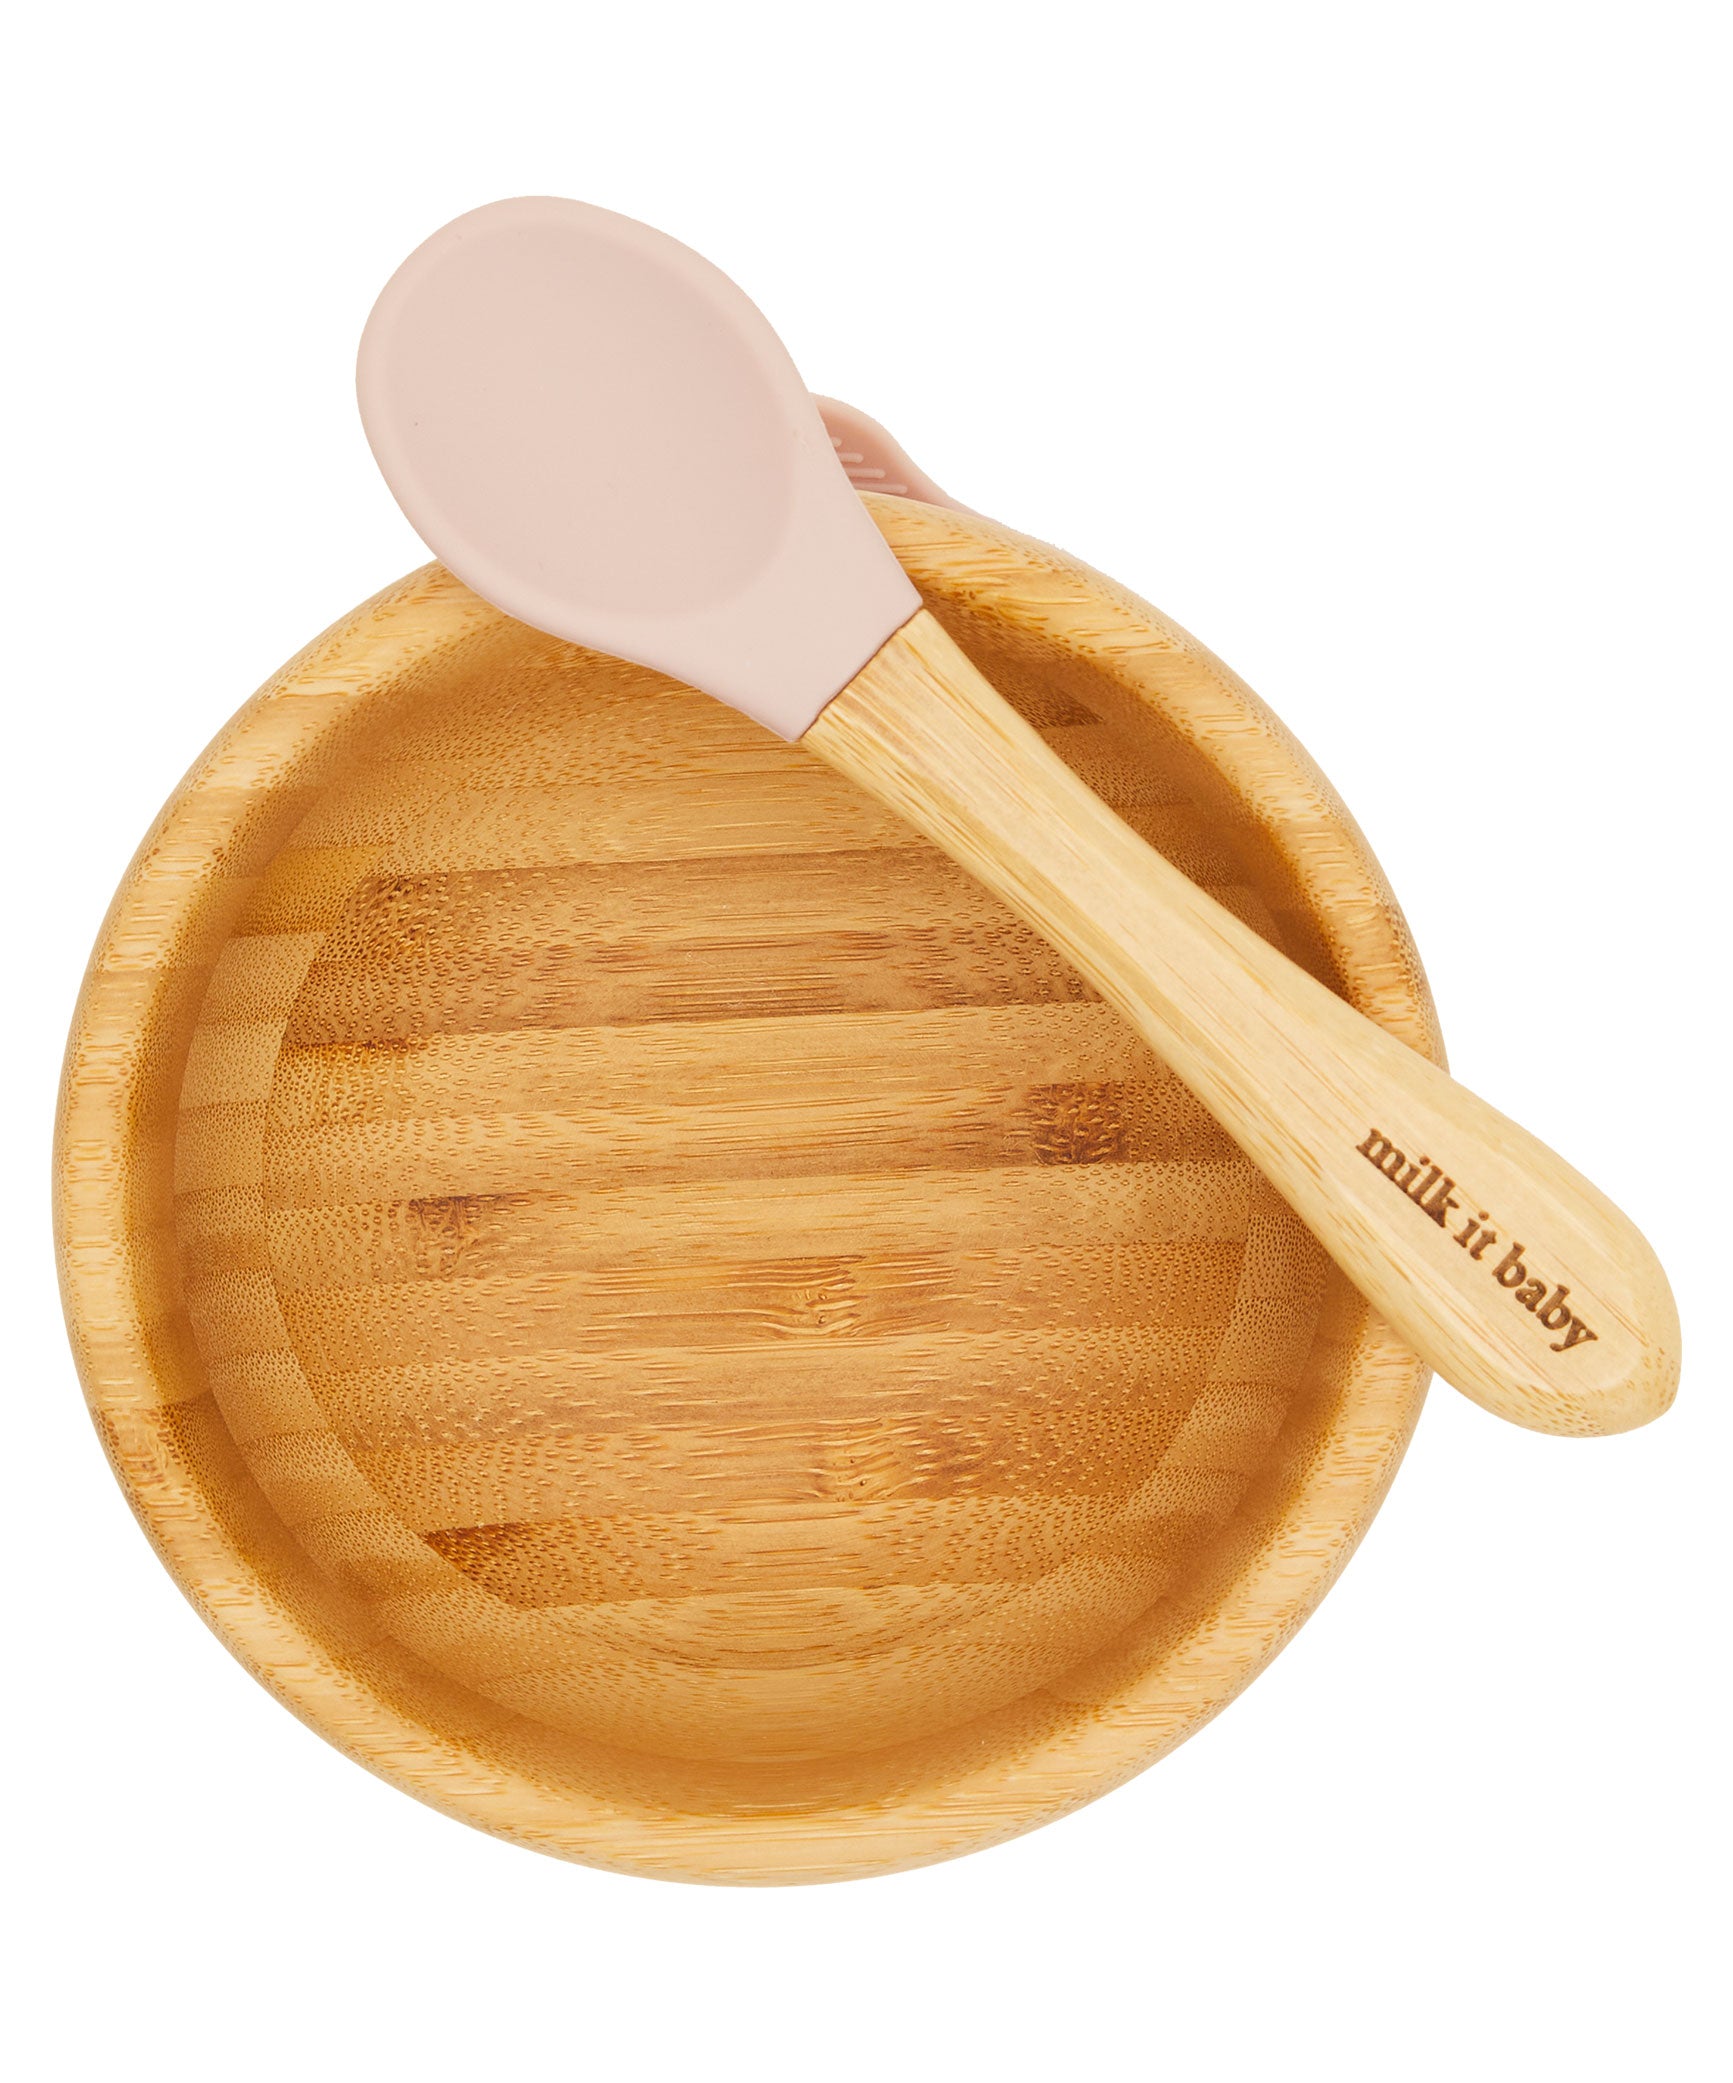 Milk It Baby, Bamboo Suction Baby Bowl & Spoon Set, Dusty Pink, MI-BAMBDP004